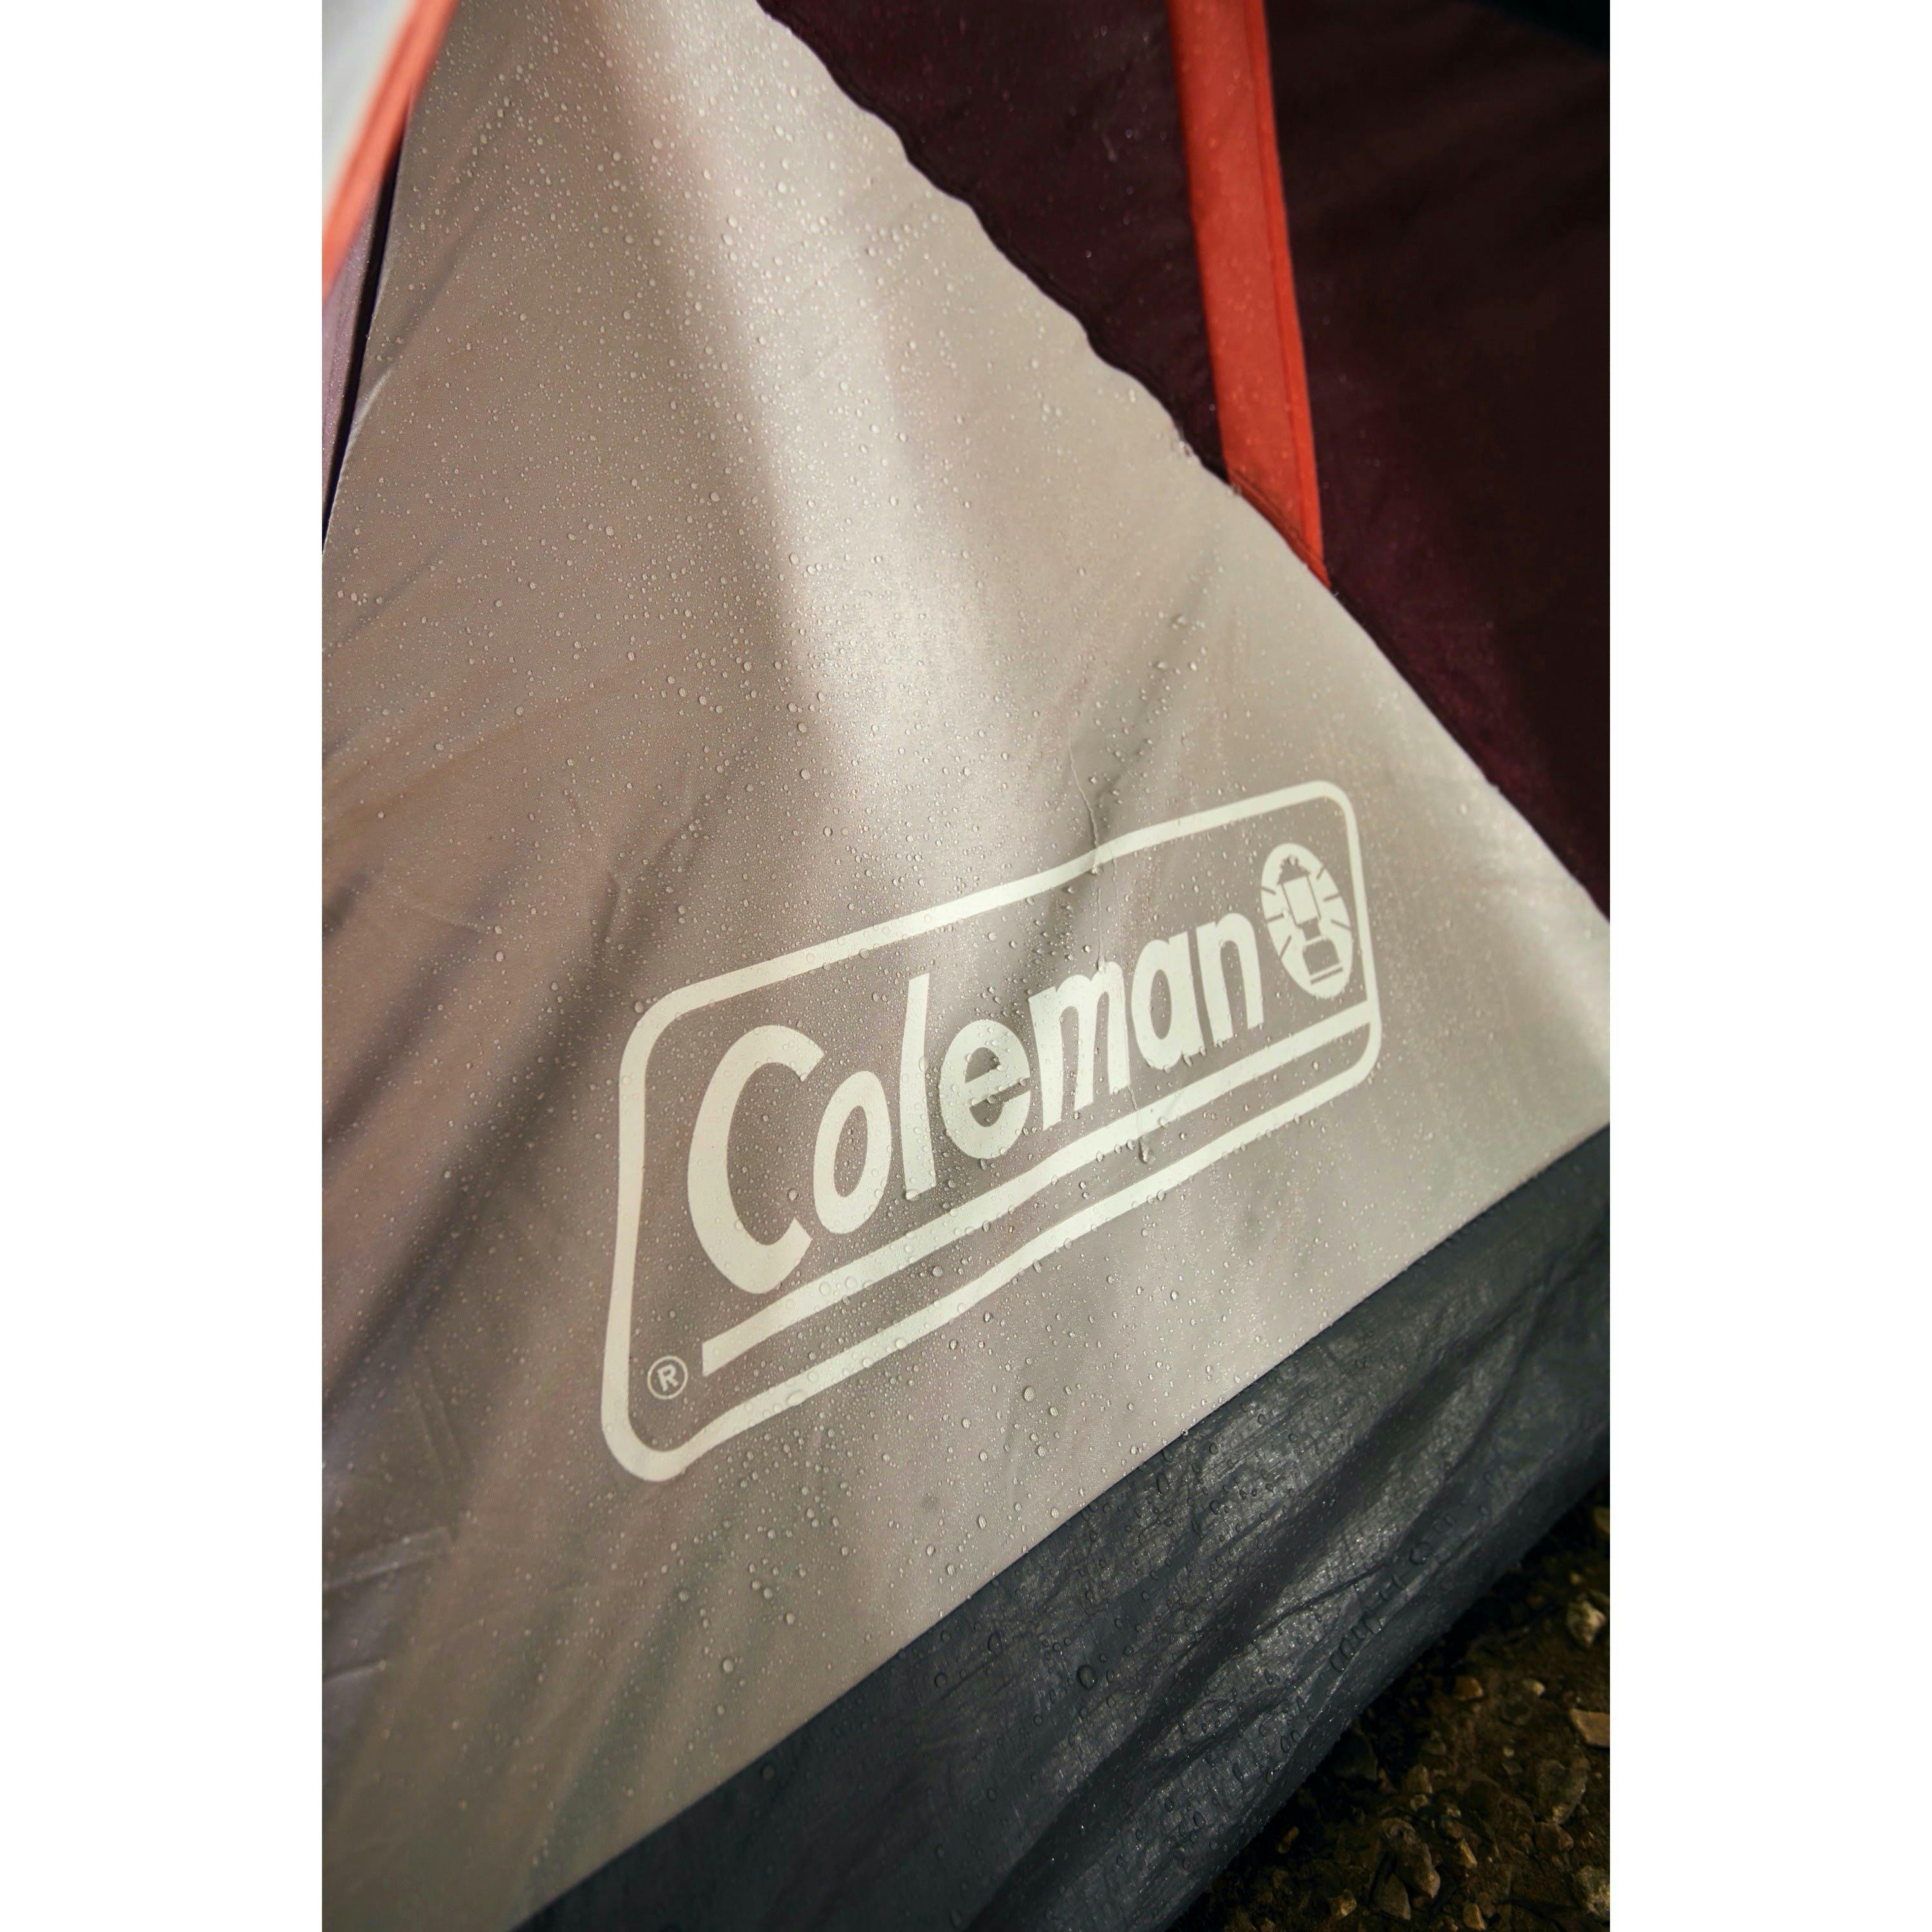 Coleman Skylodge Instant Camping Tent · 8 Person · Blackberry